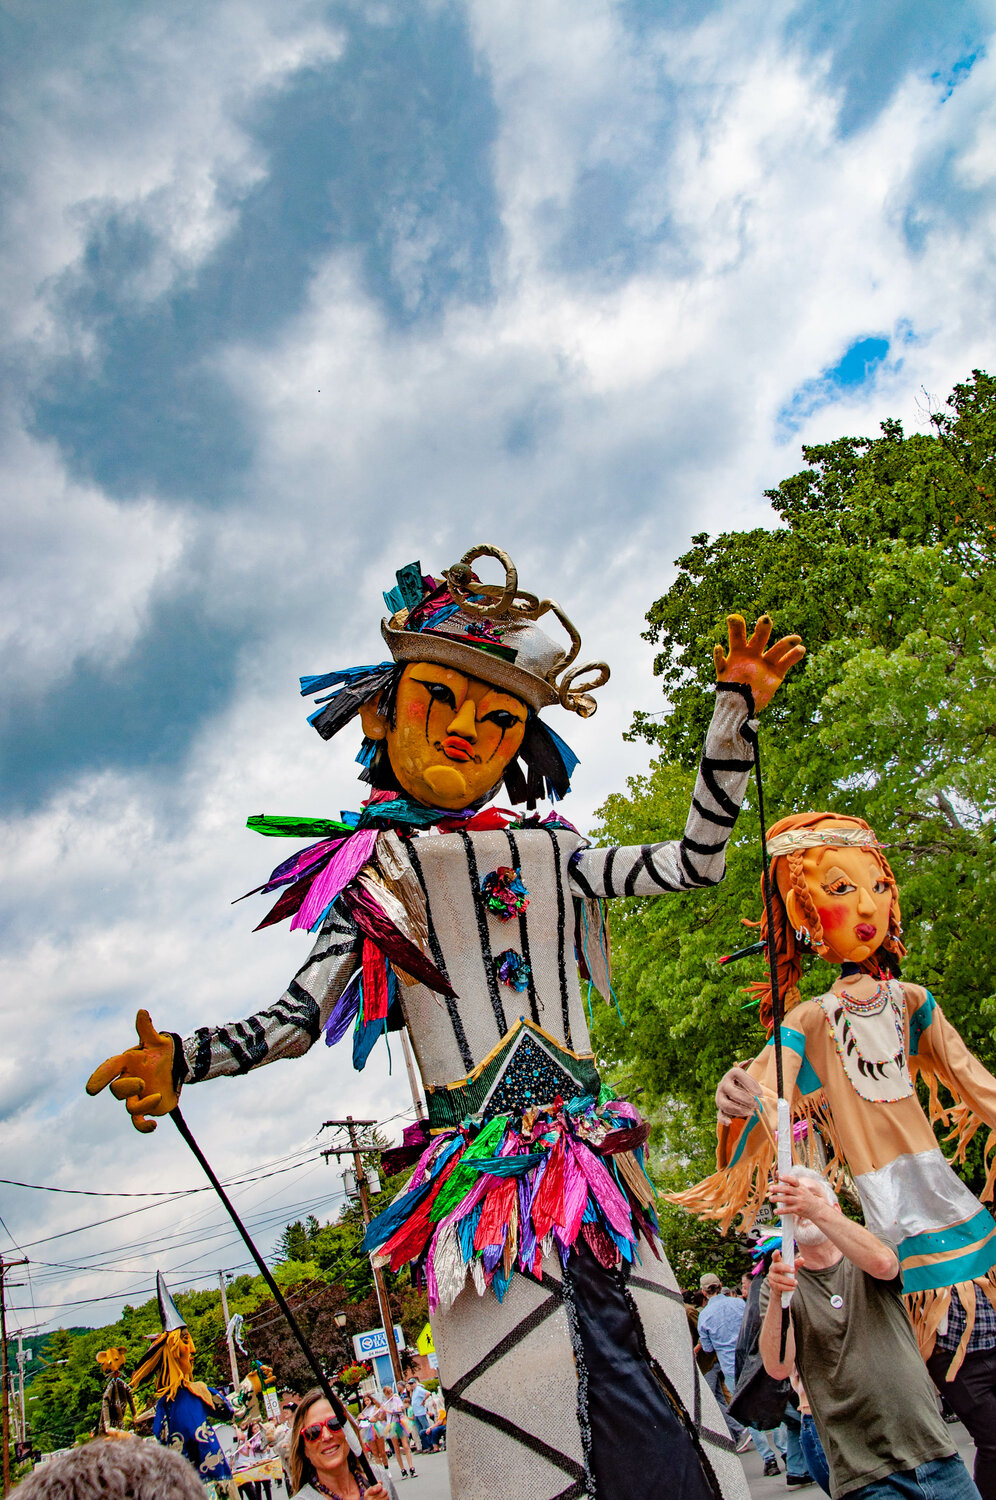 Animating the larger-than-life fantastical creations and engaging with the crowd, this year’s volunteer puppeteers outdid themselves at the Livingston Manor Trout Parade.